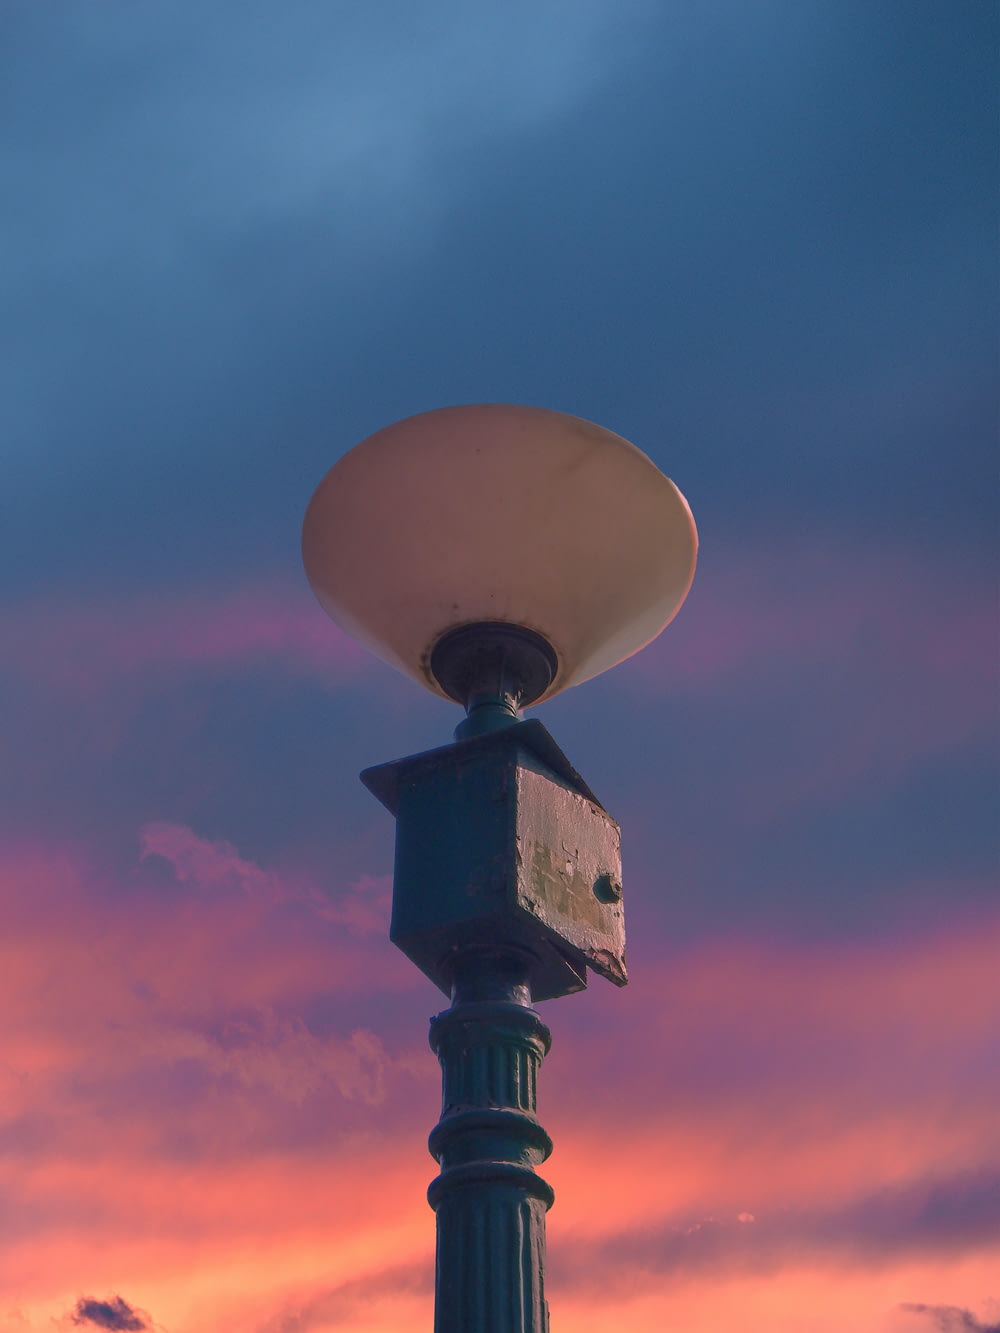 a lamp post with a bird house on top of it